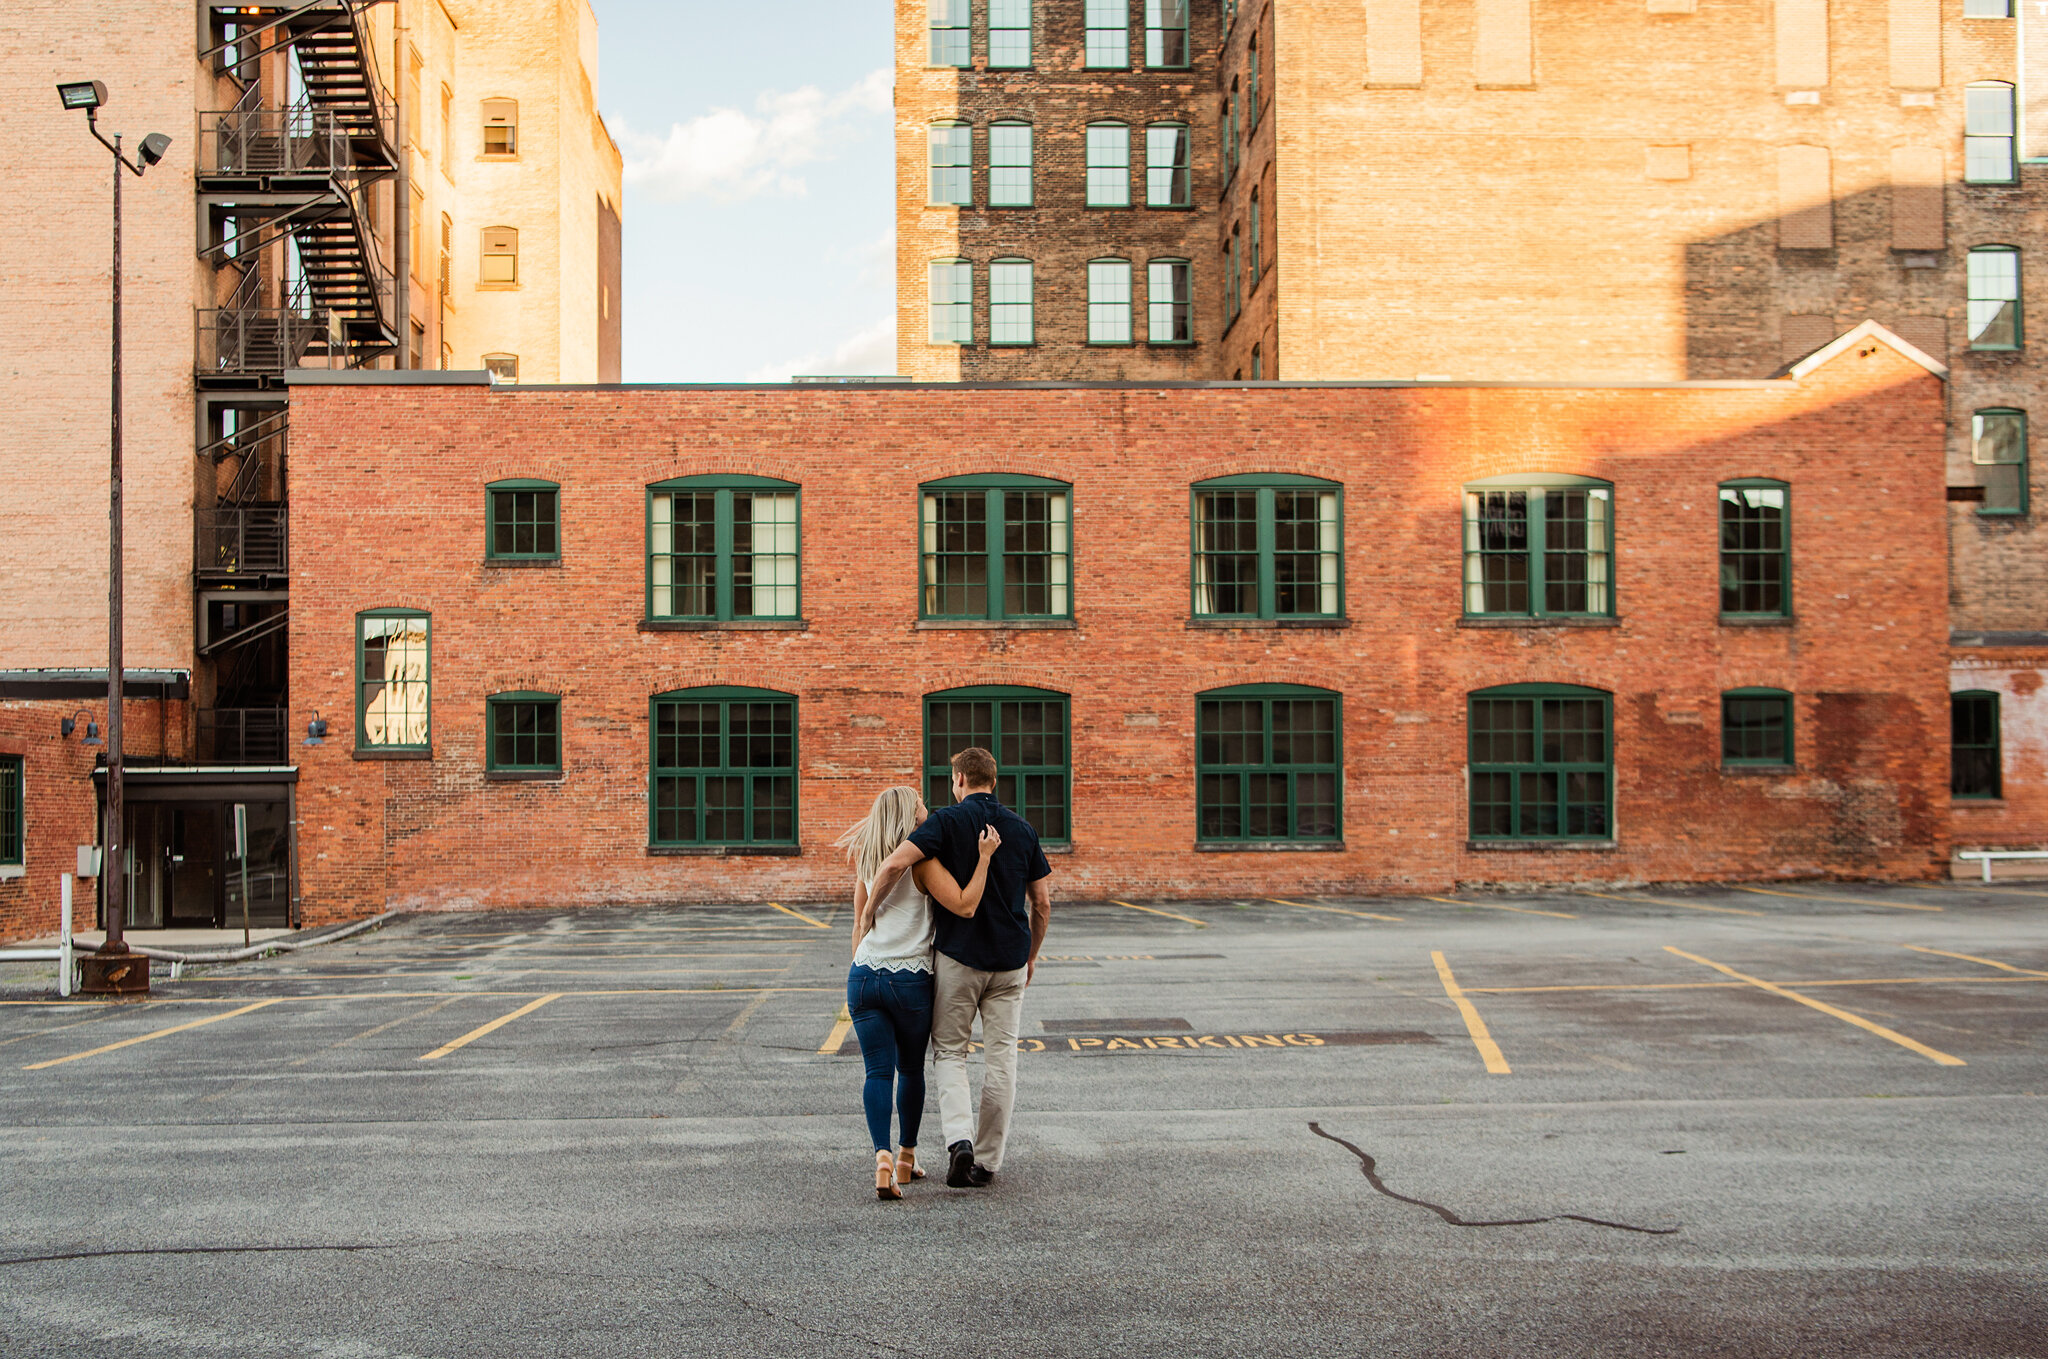 Genesee_Brew_House_High_Falls_Rochester_Engagement_Session_JILL_STUDIO_Rochester_NY_Photographer_5502.jpg